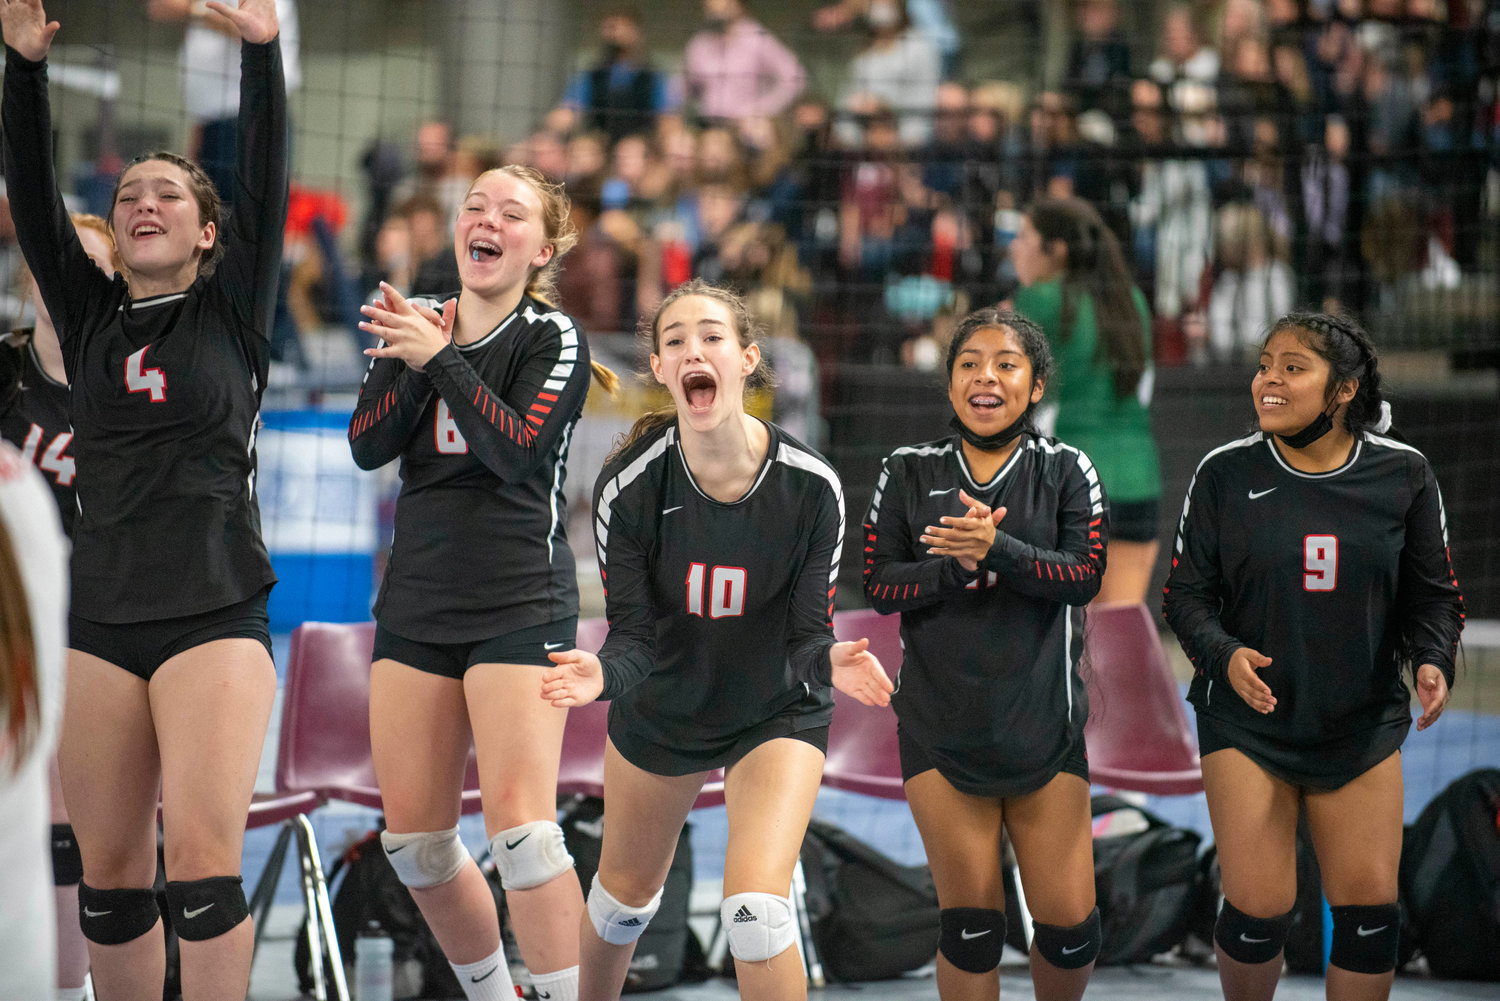 Mossyrock’s bench erupts in cheers during the 1B state title match Friday in Yakima.